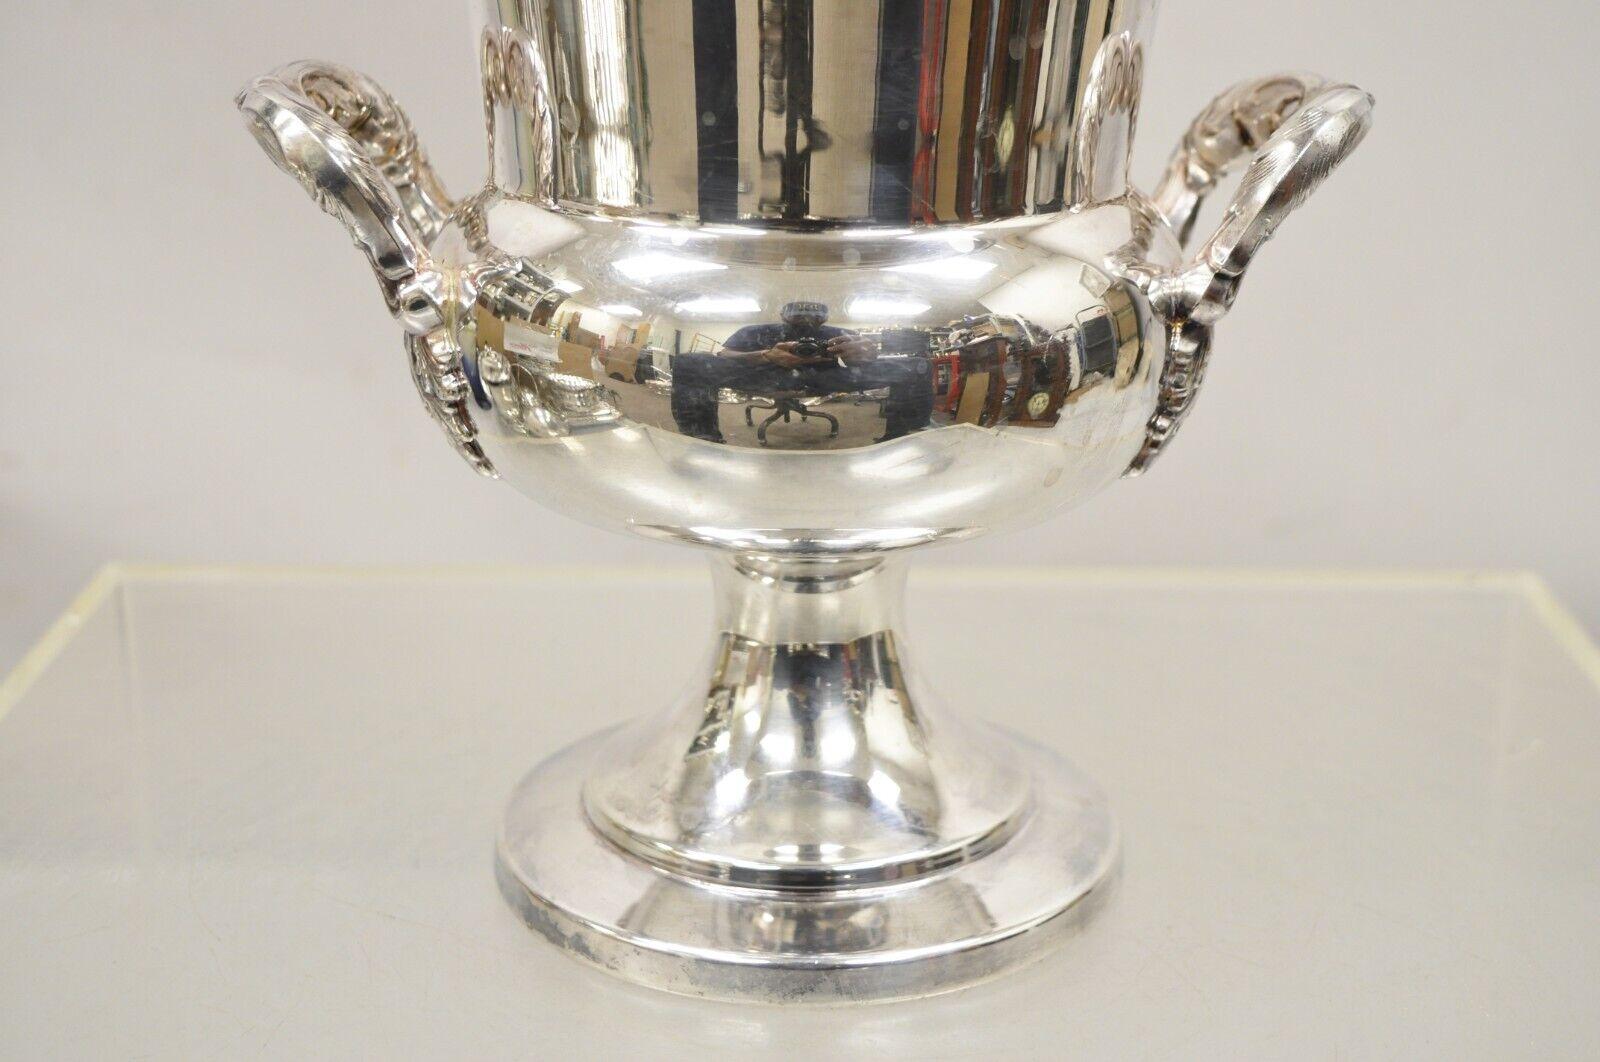 Vintage EPCA Silverplate by Poole 423 Trophy Cup Champagne Chiller Ice Bucket In Good Condition For Sale In Philadelphia, PA